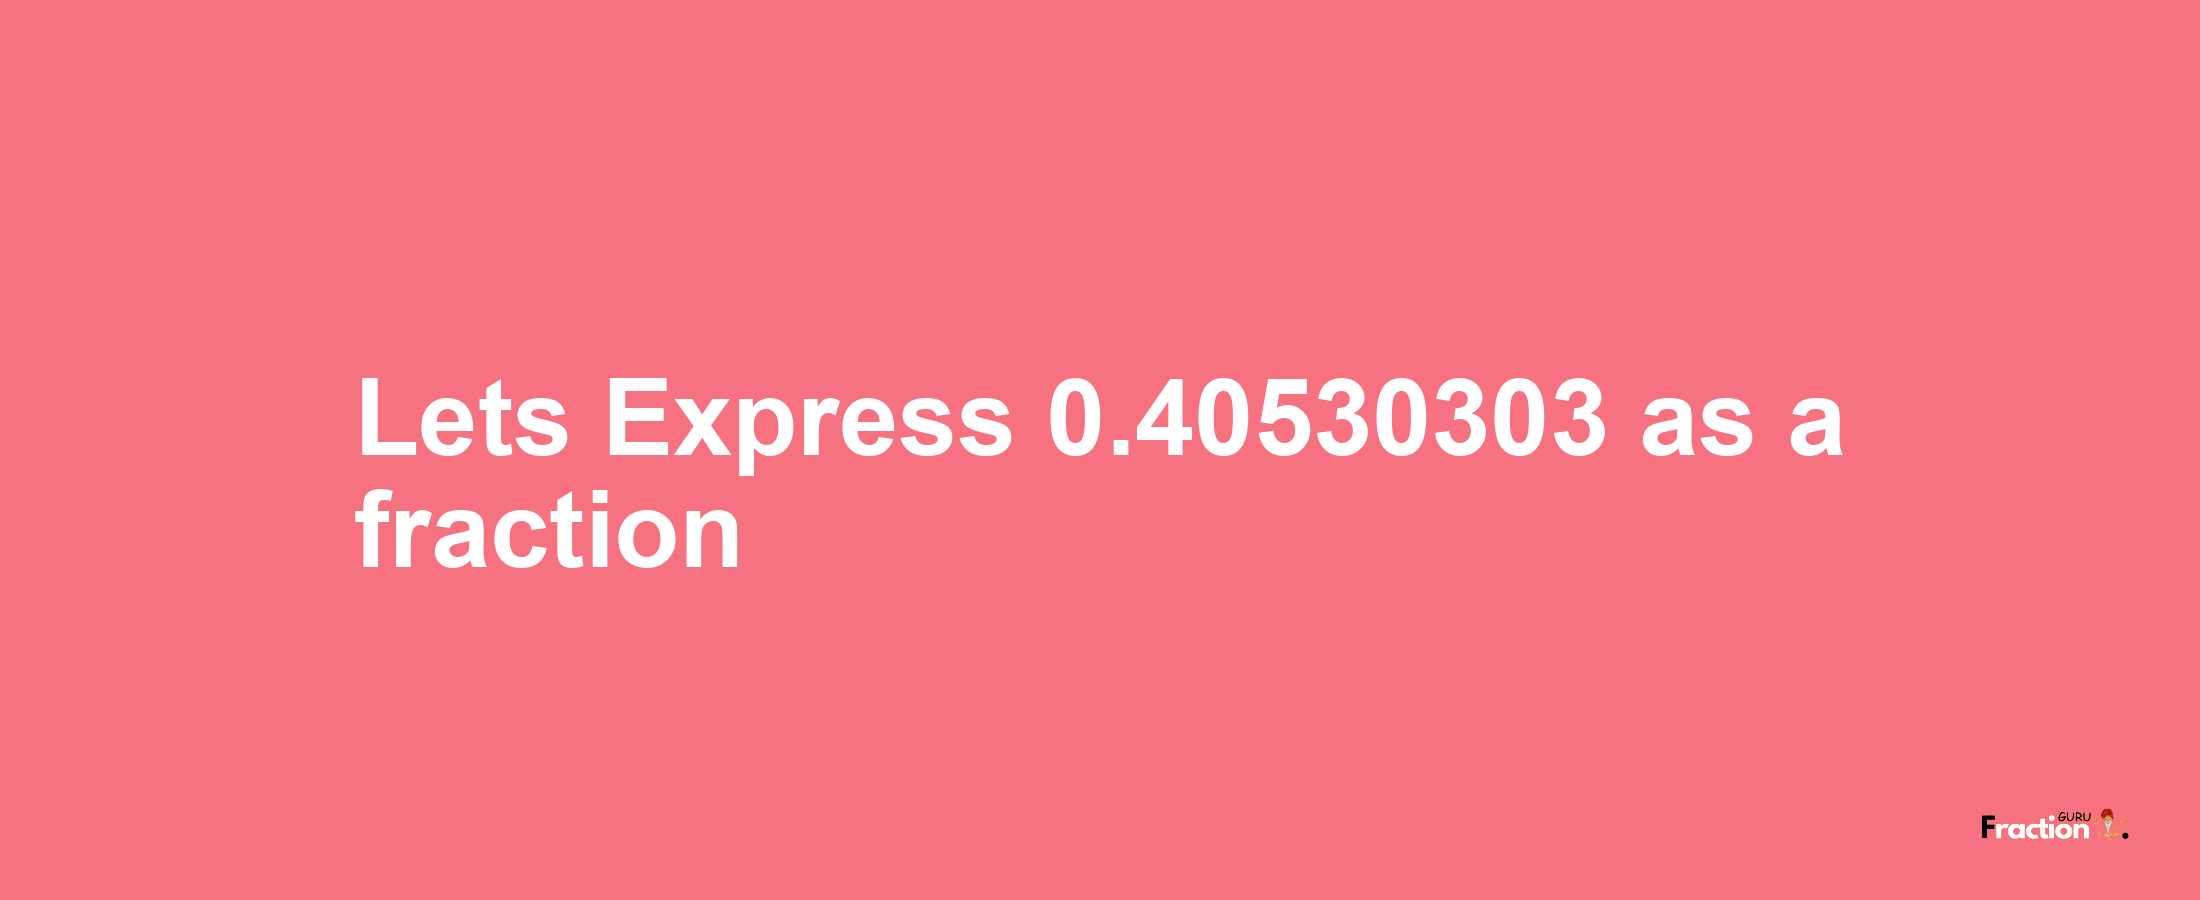 Lets Express 0.40530303 as afraction